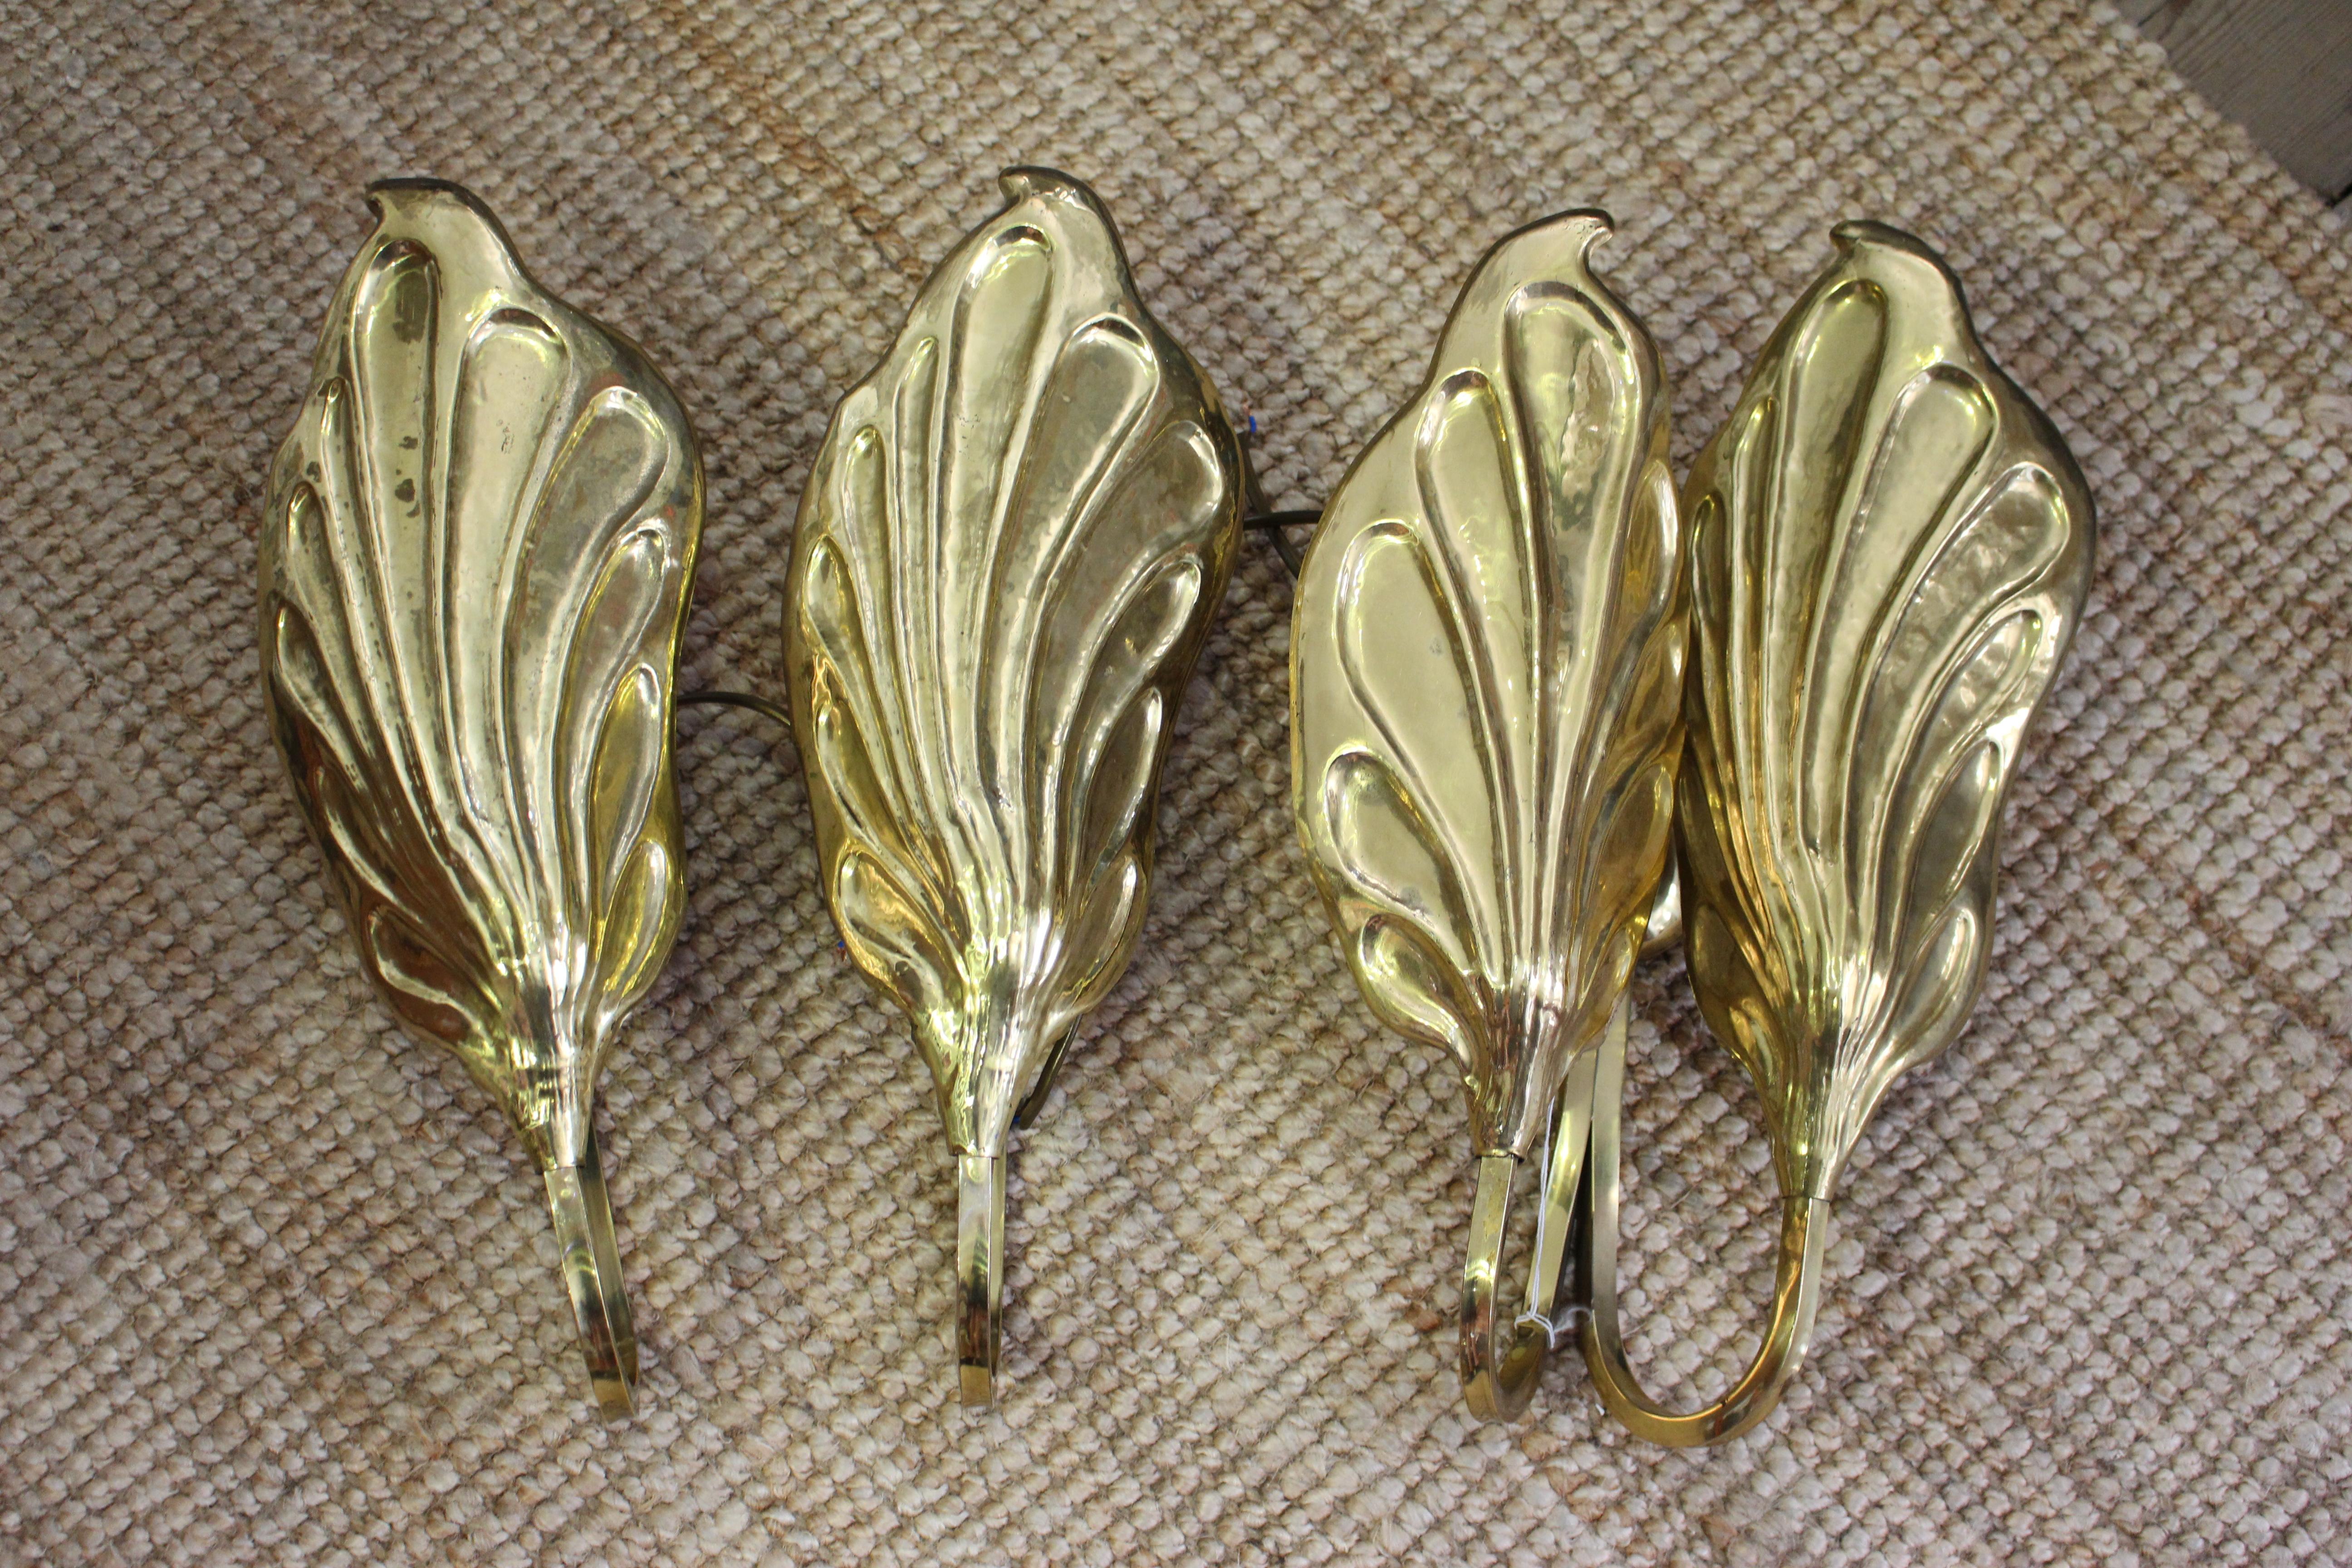 A set of three Italian wall lights by Tommaso Barbi, circa 1970applied labels inscribed G &G Studio Disegni, solid brass hand shaped brass fittings, the shades in the shape of leaves, with light fitments.